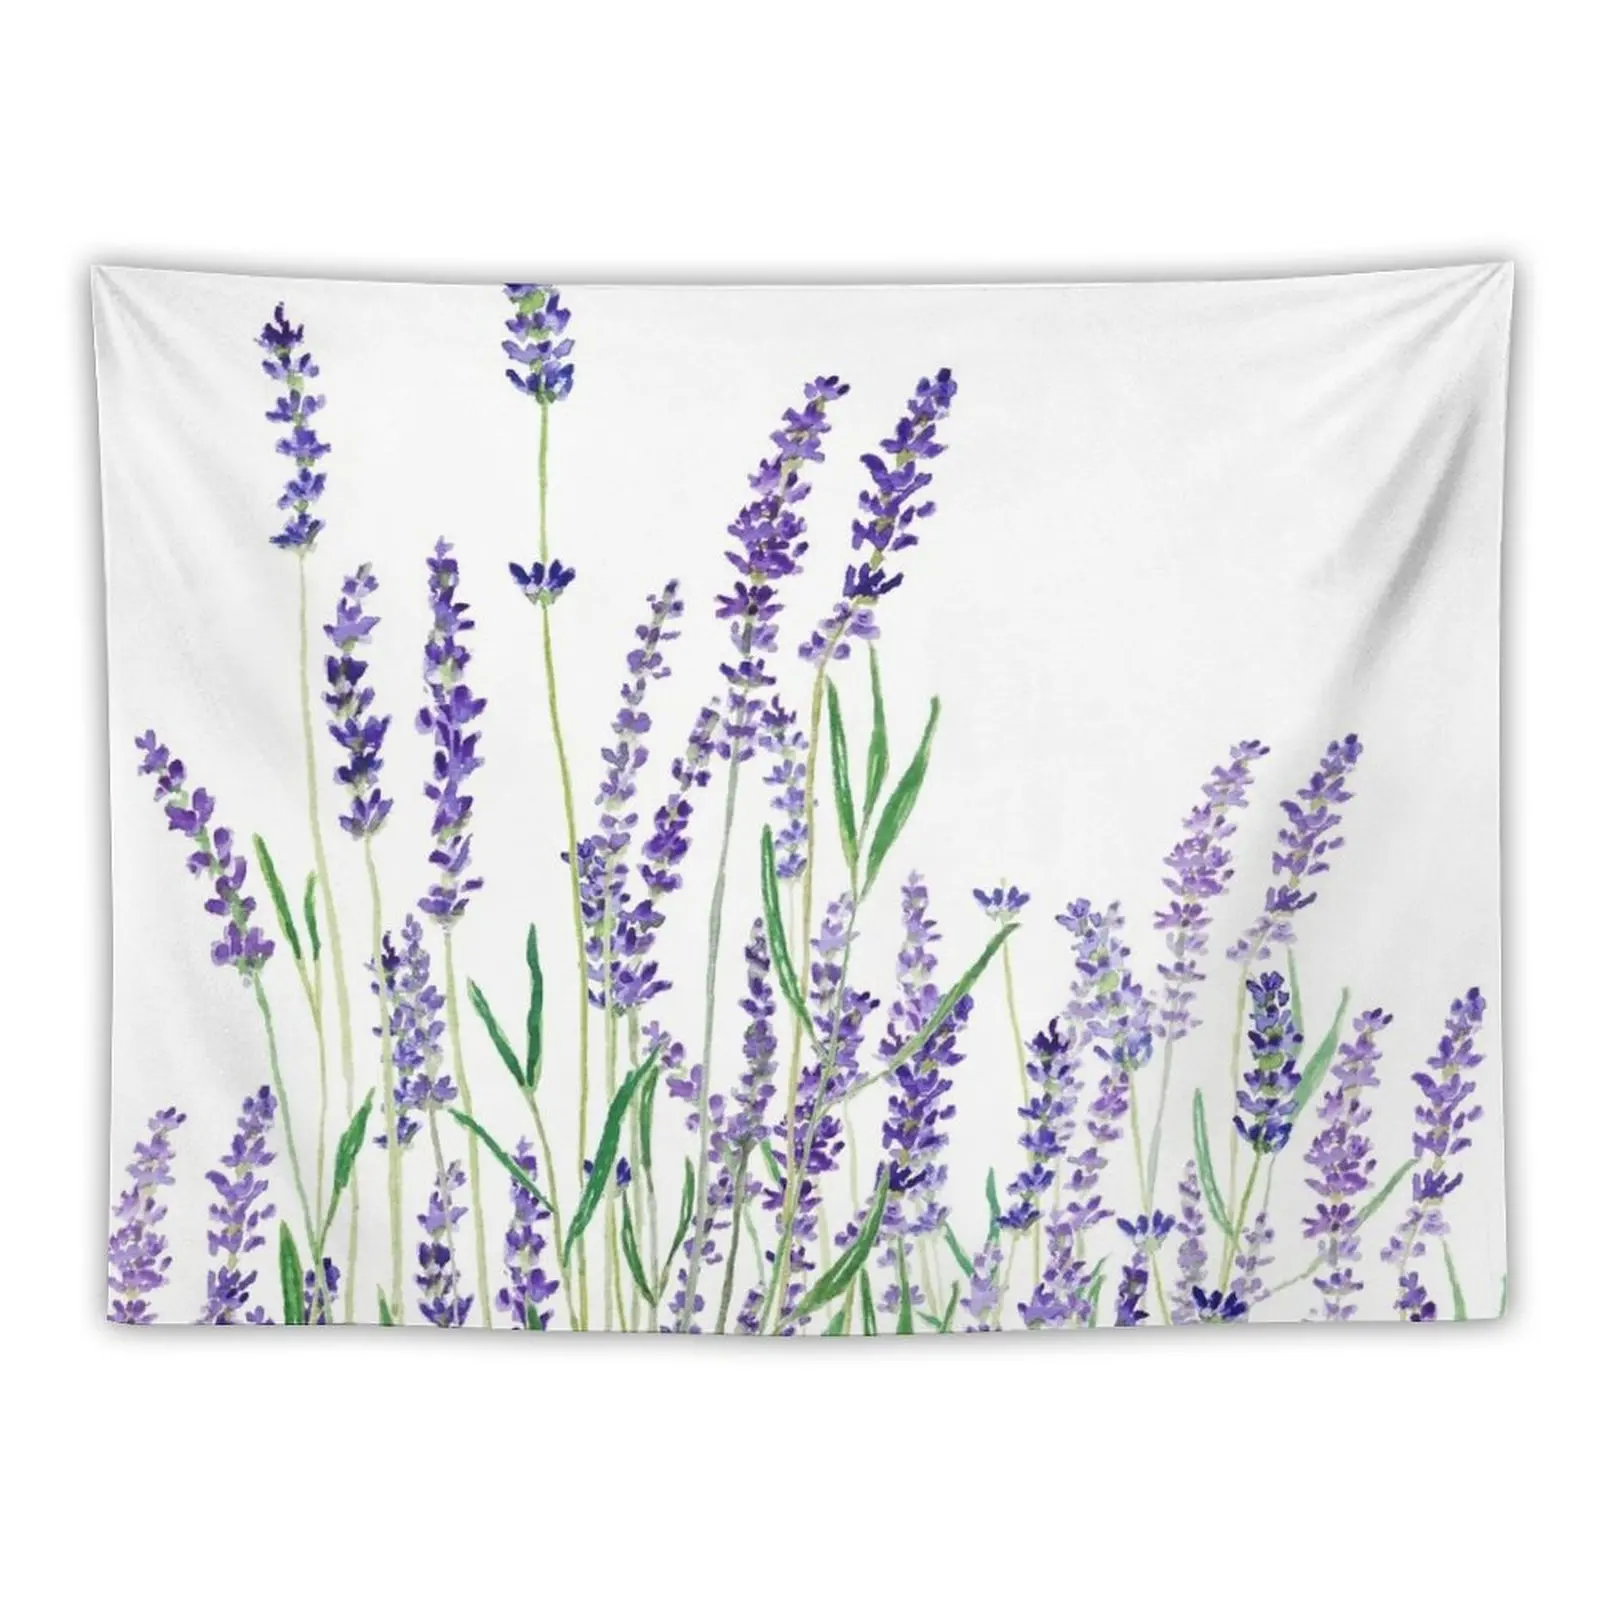 

purple lavender Tapestry Hanging Wall Room Decore Aesthetic Carpet Wall Tapestry